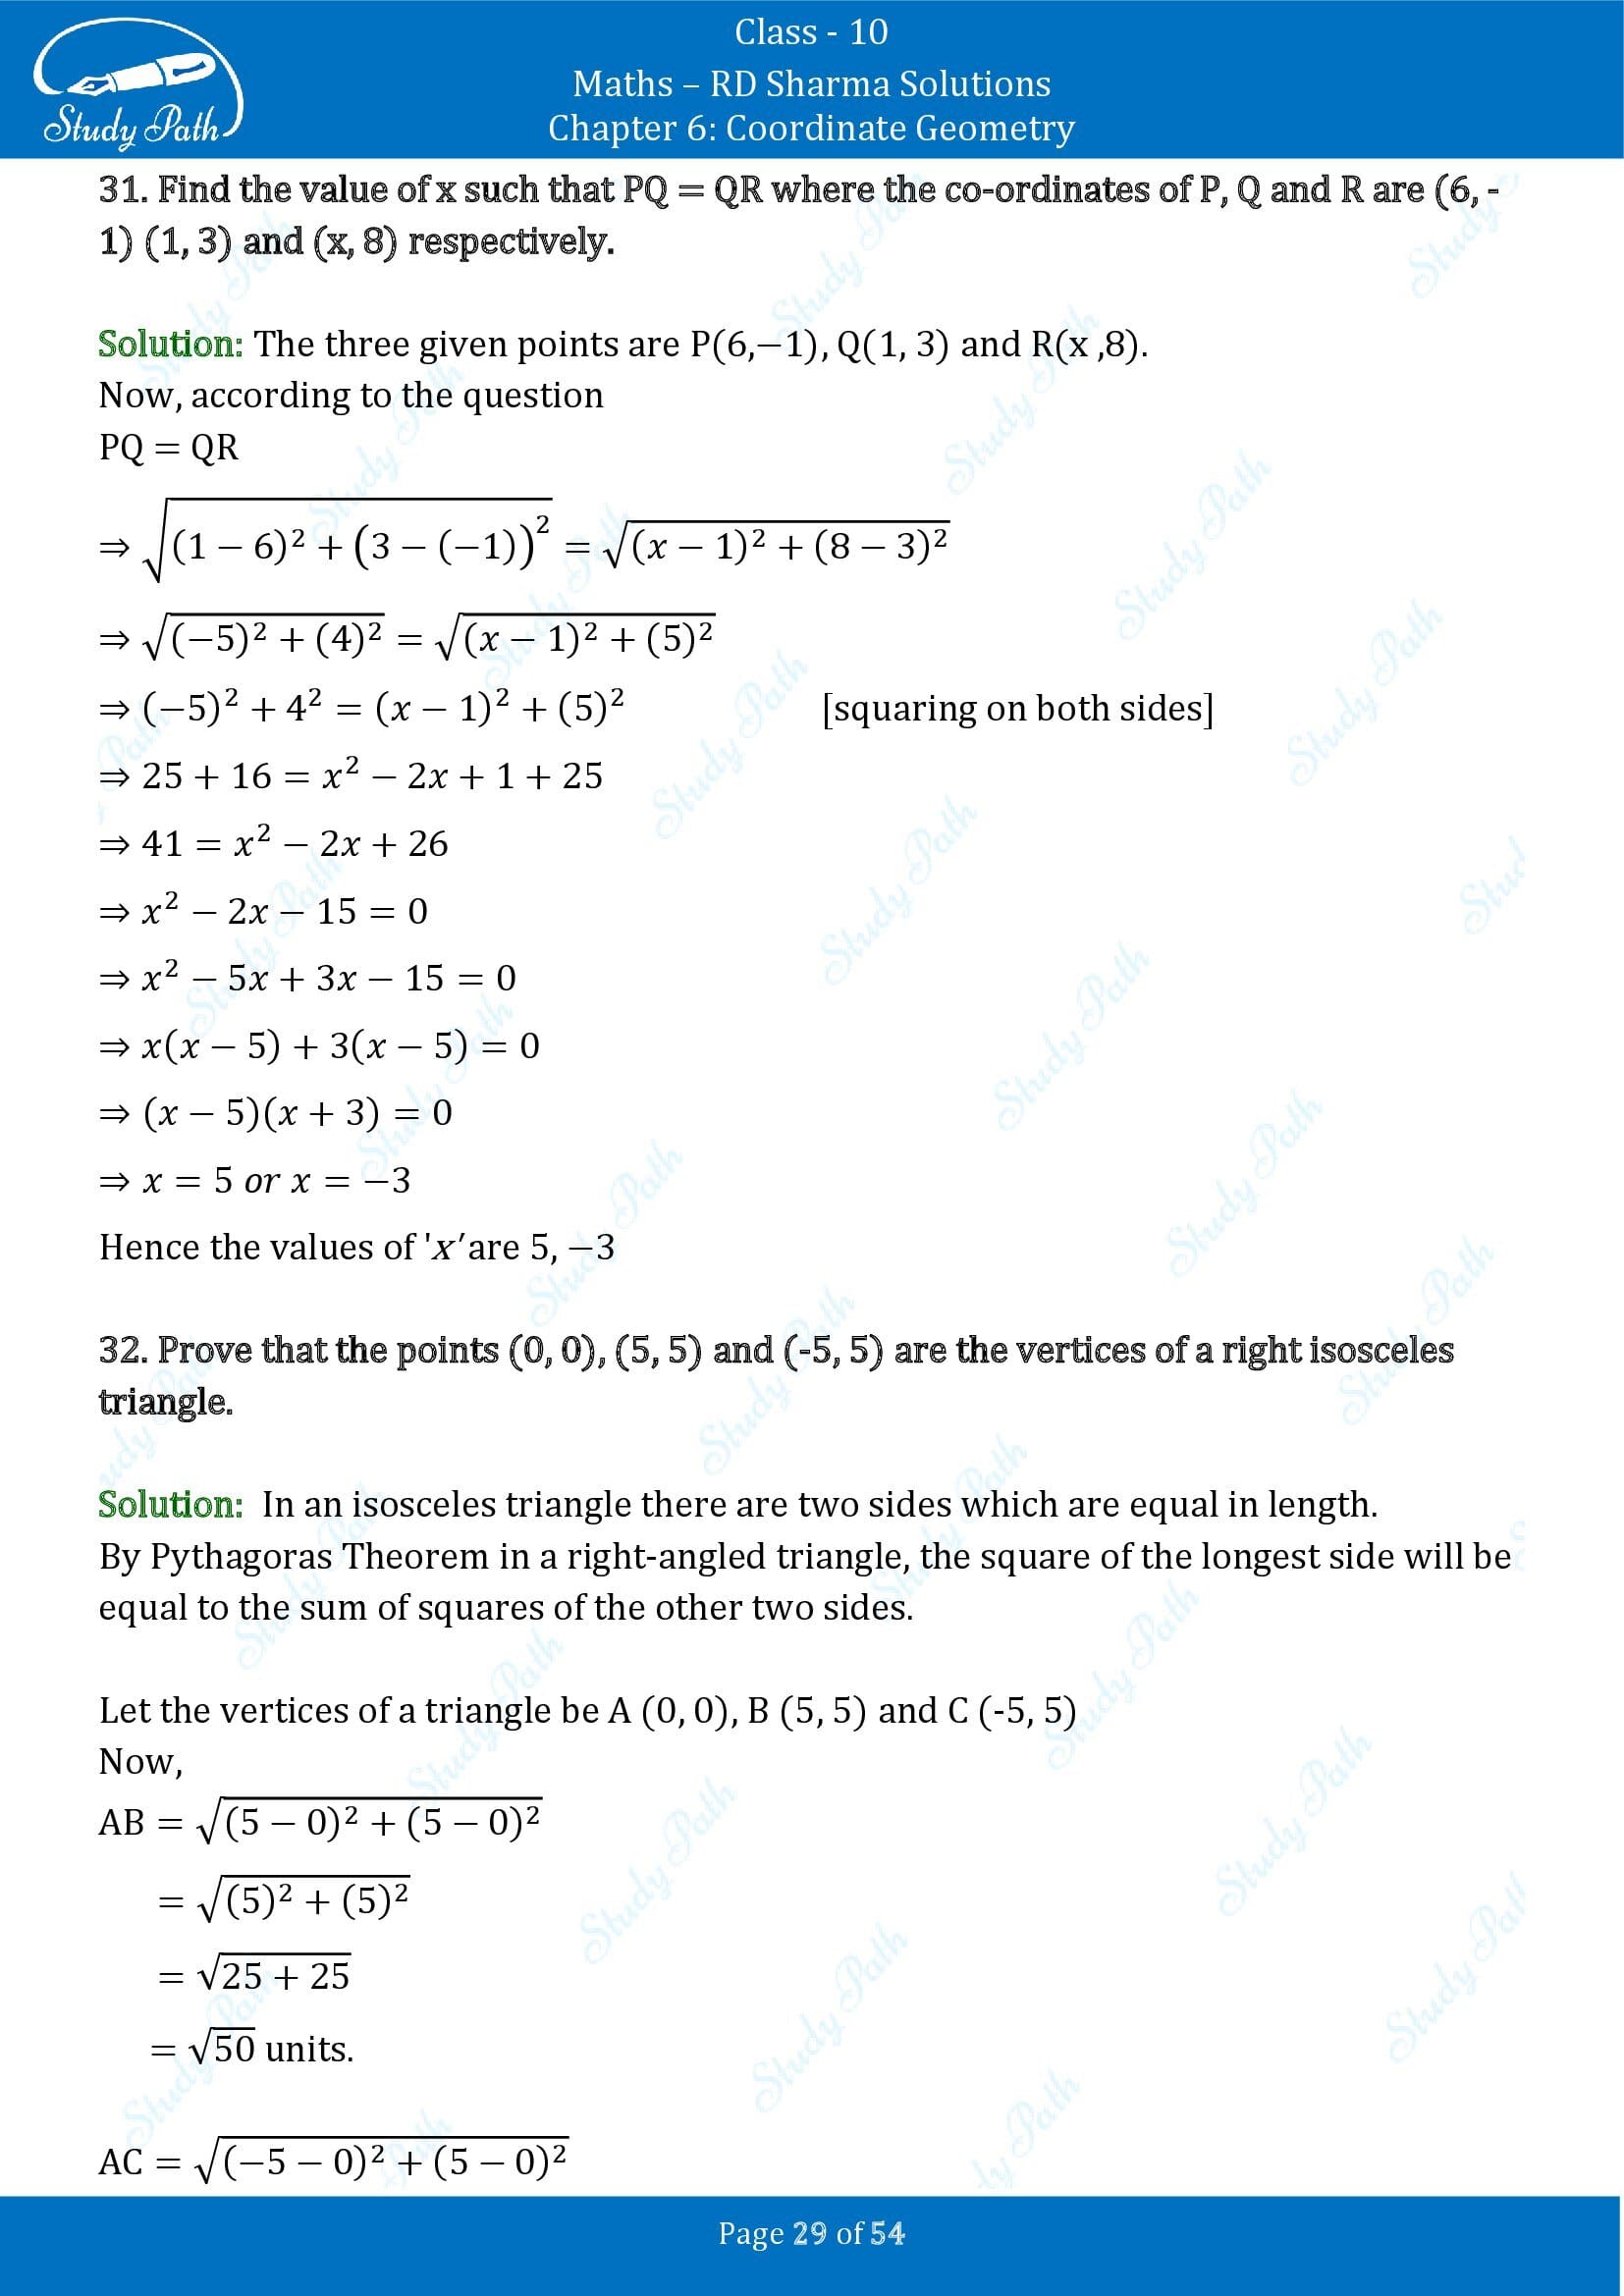 RD Sharma Solutions Class 10 Chapter 6 Coordinate Geometry Exercise 6.2 0029